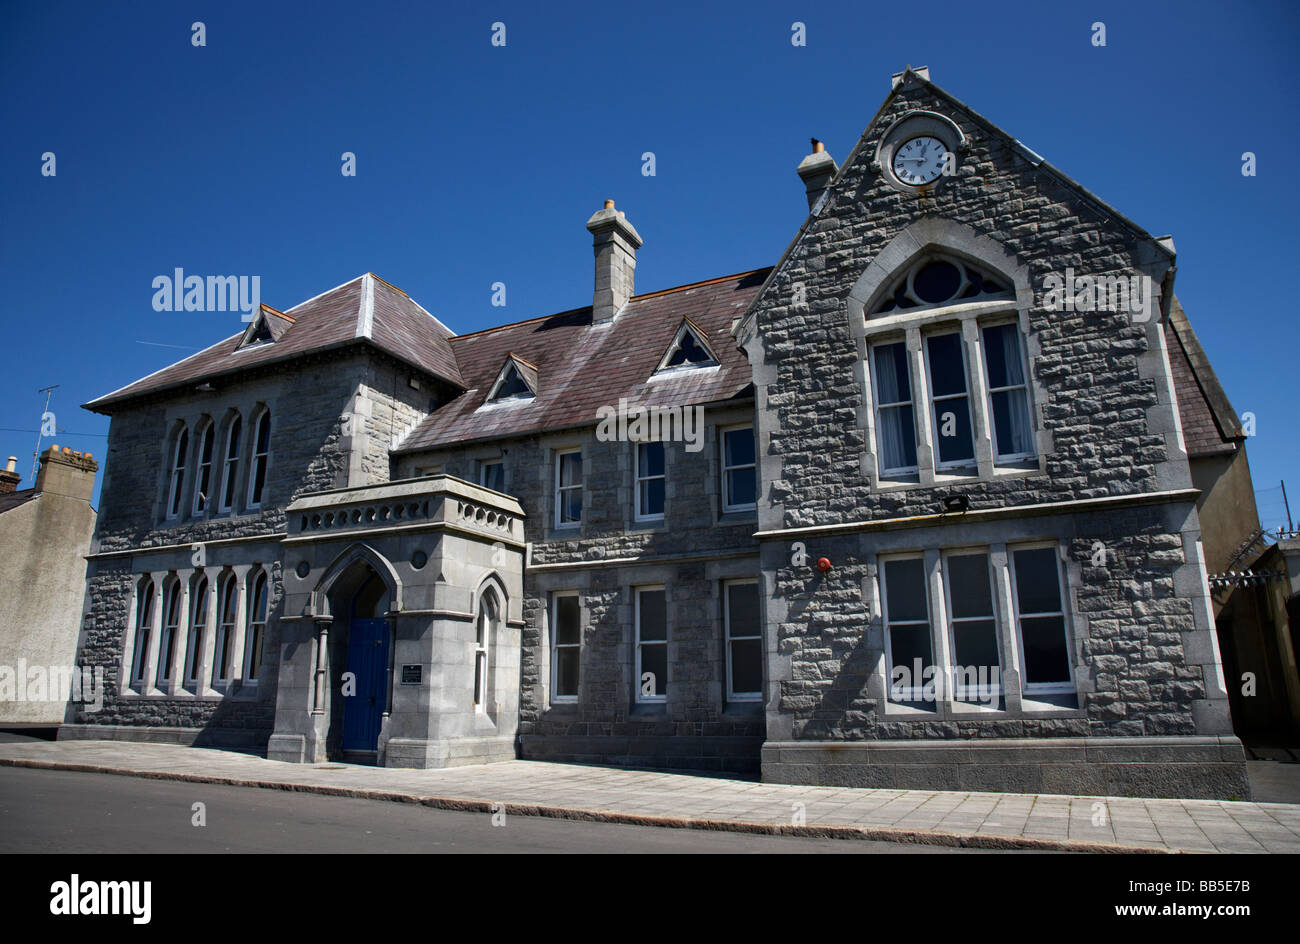 the town hall or institute built in 1886 in bessbrook model village Stock Photo